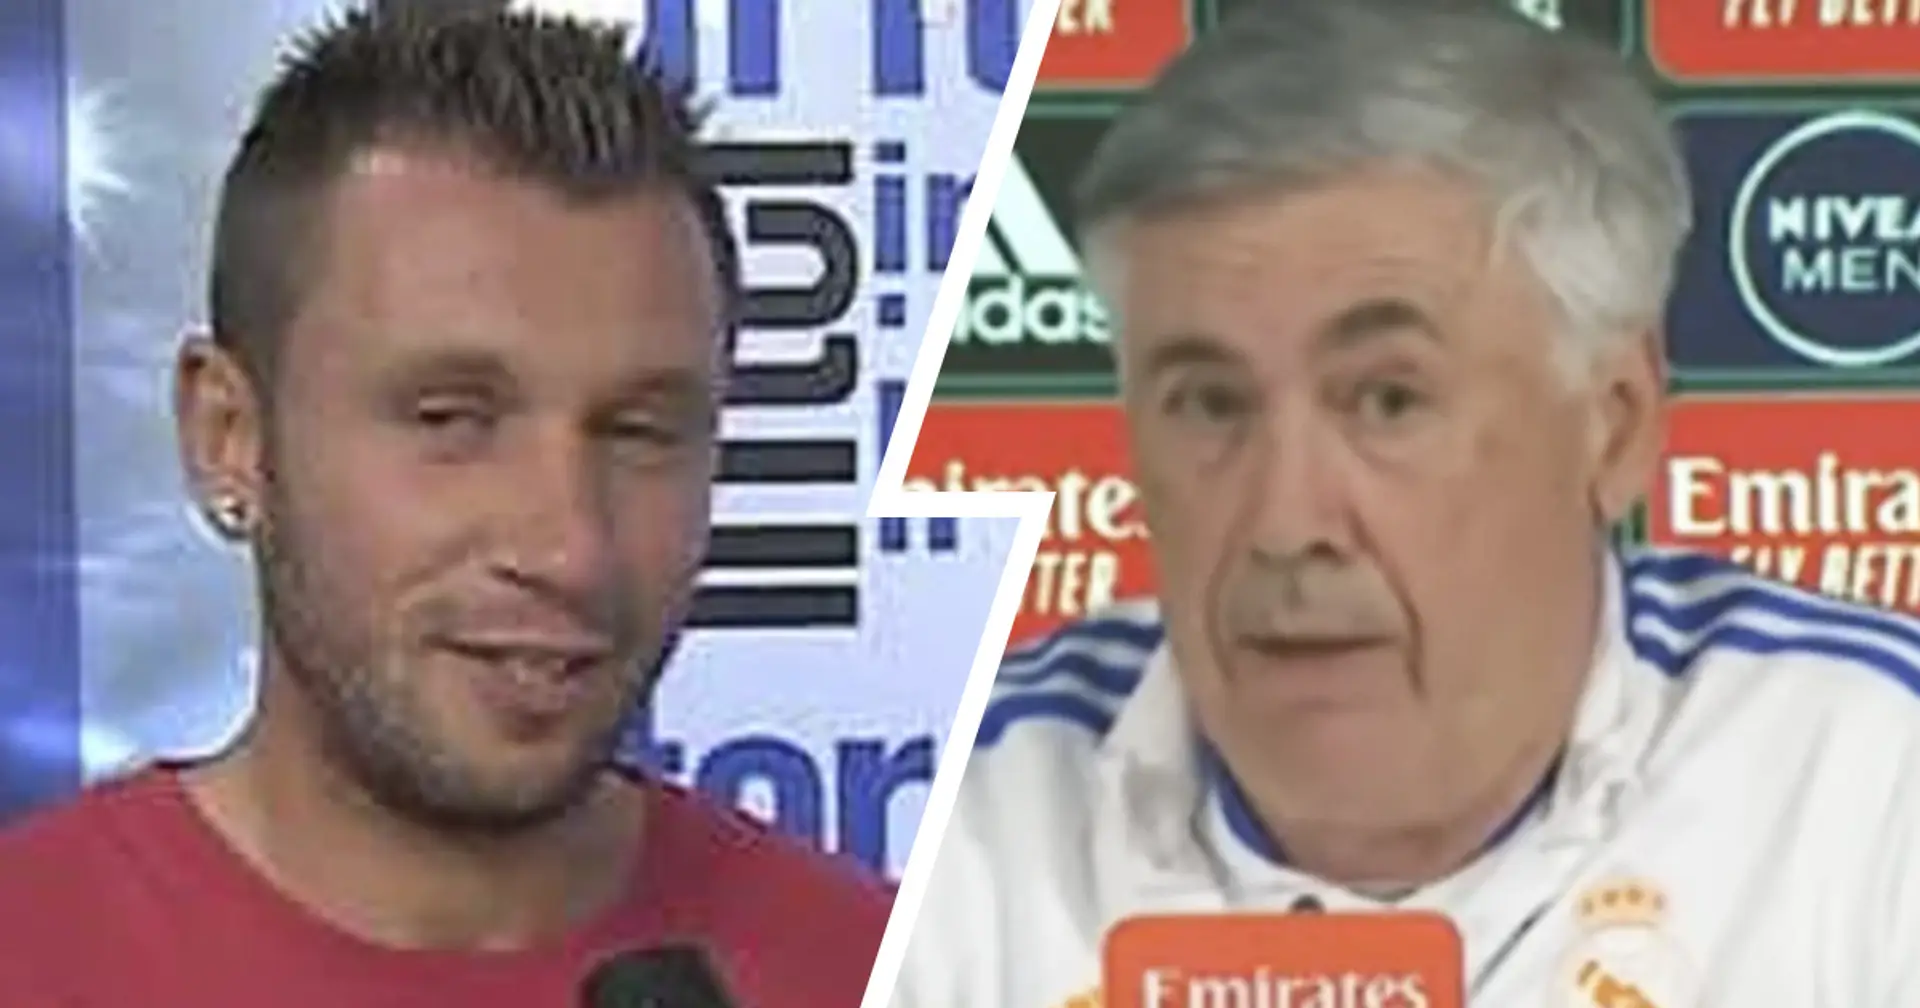 'We all know who he is': Ancelotti reacts to Cassano's comments about 'lucky' Real Madrid